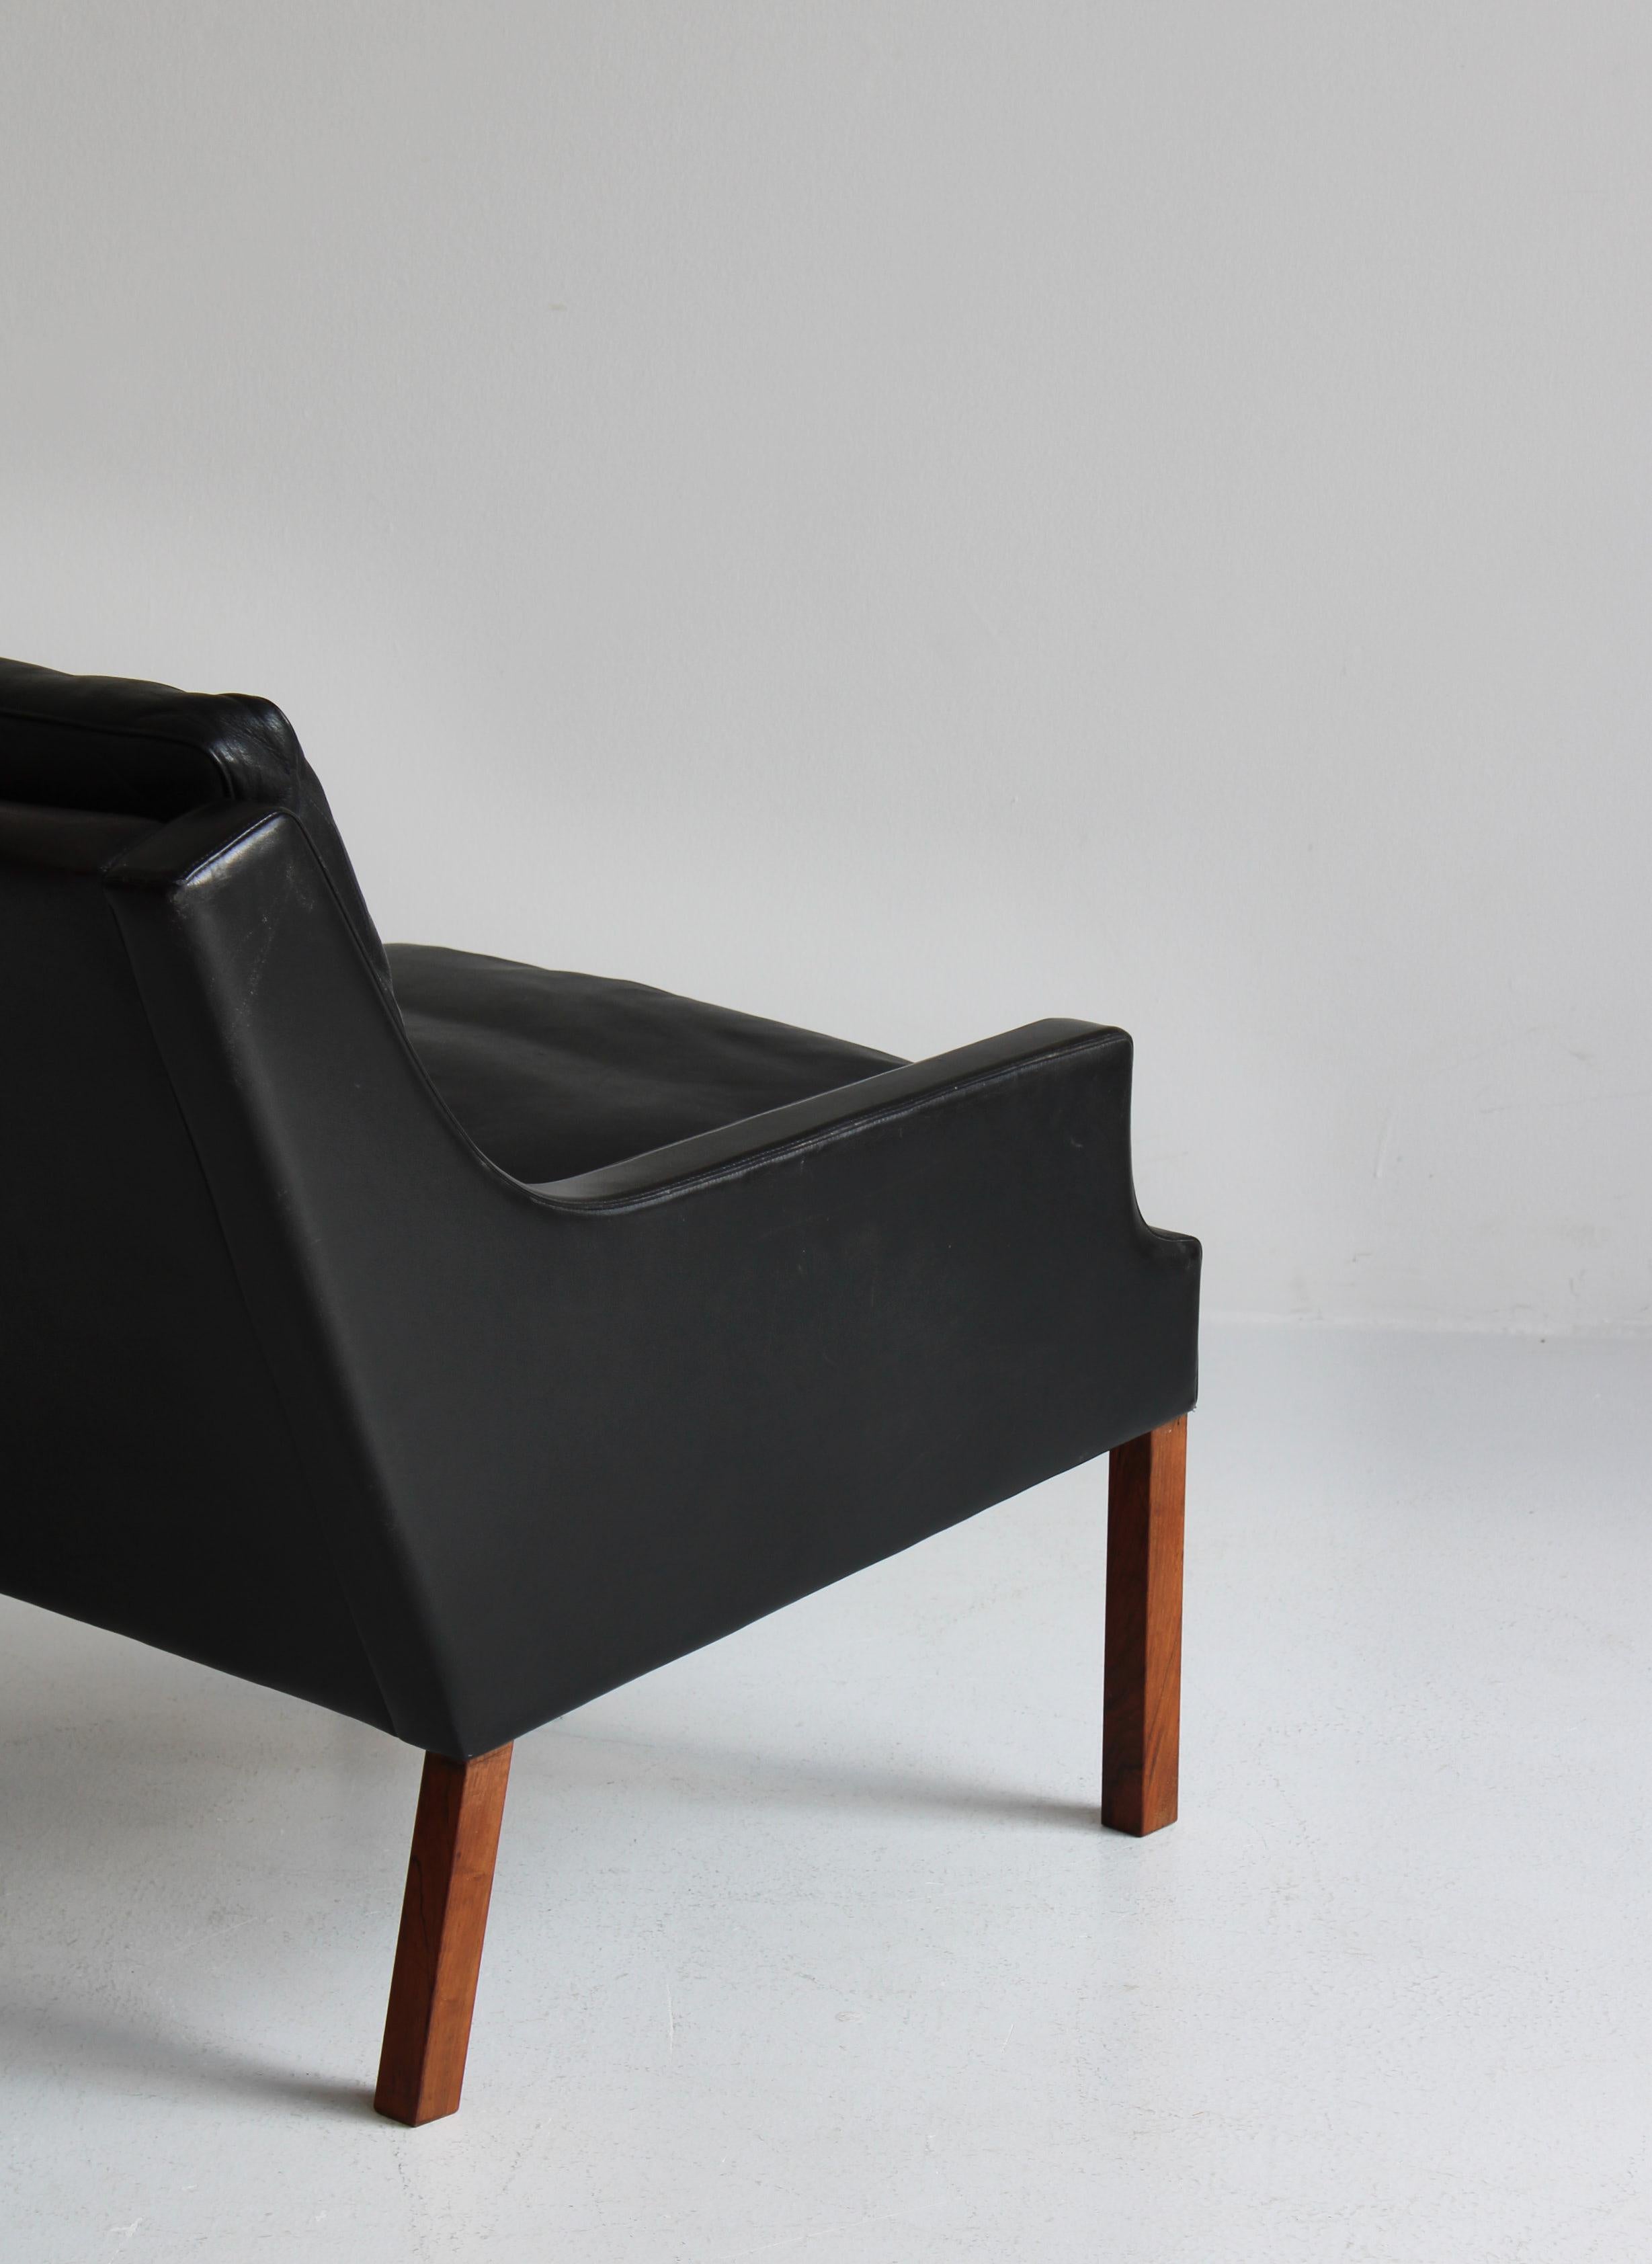 Set of Danish Modern Lounge Chairs in Black Leather by Rud Thygesen, 1966 4